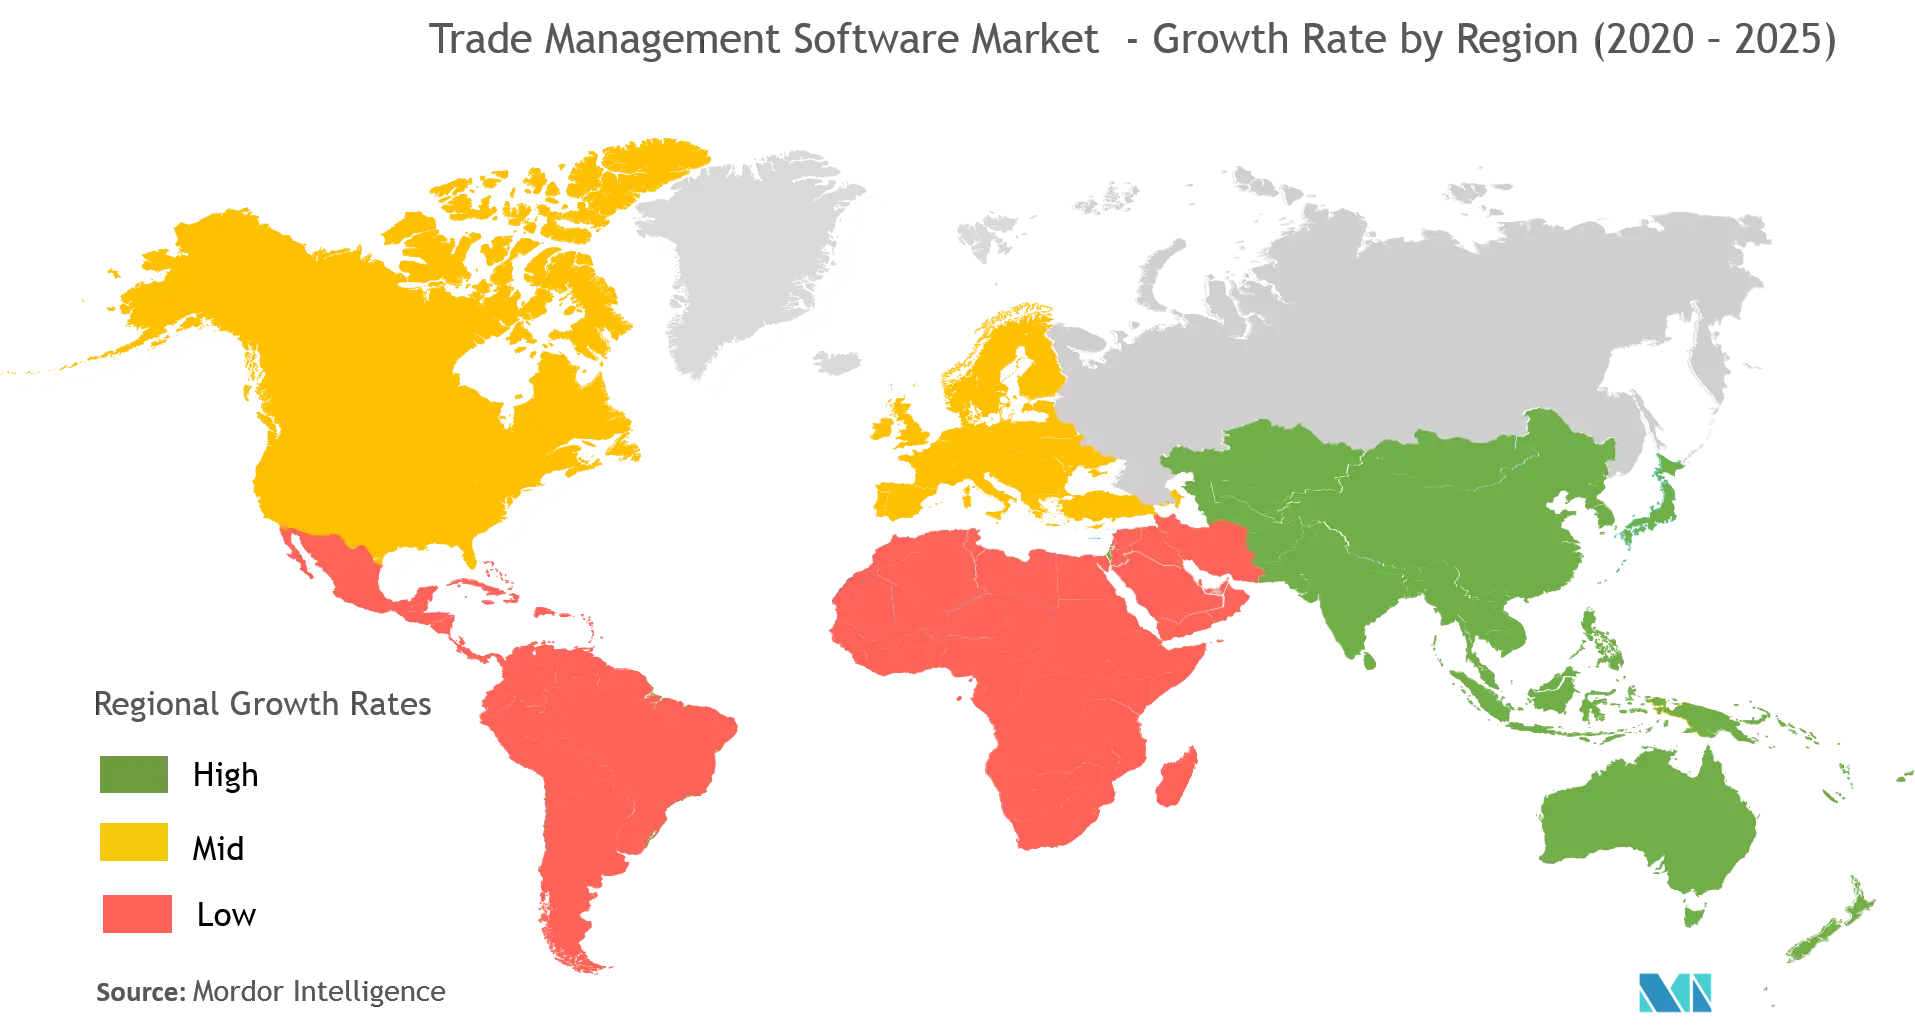 Trade Management Software Market Growth Rate